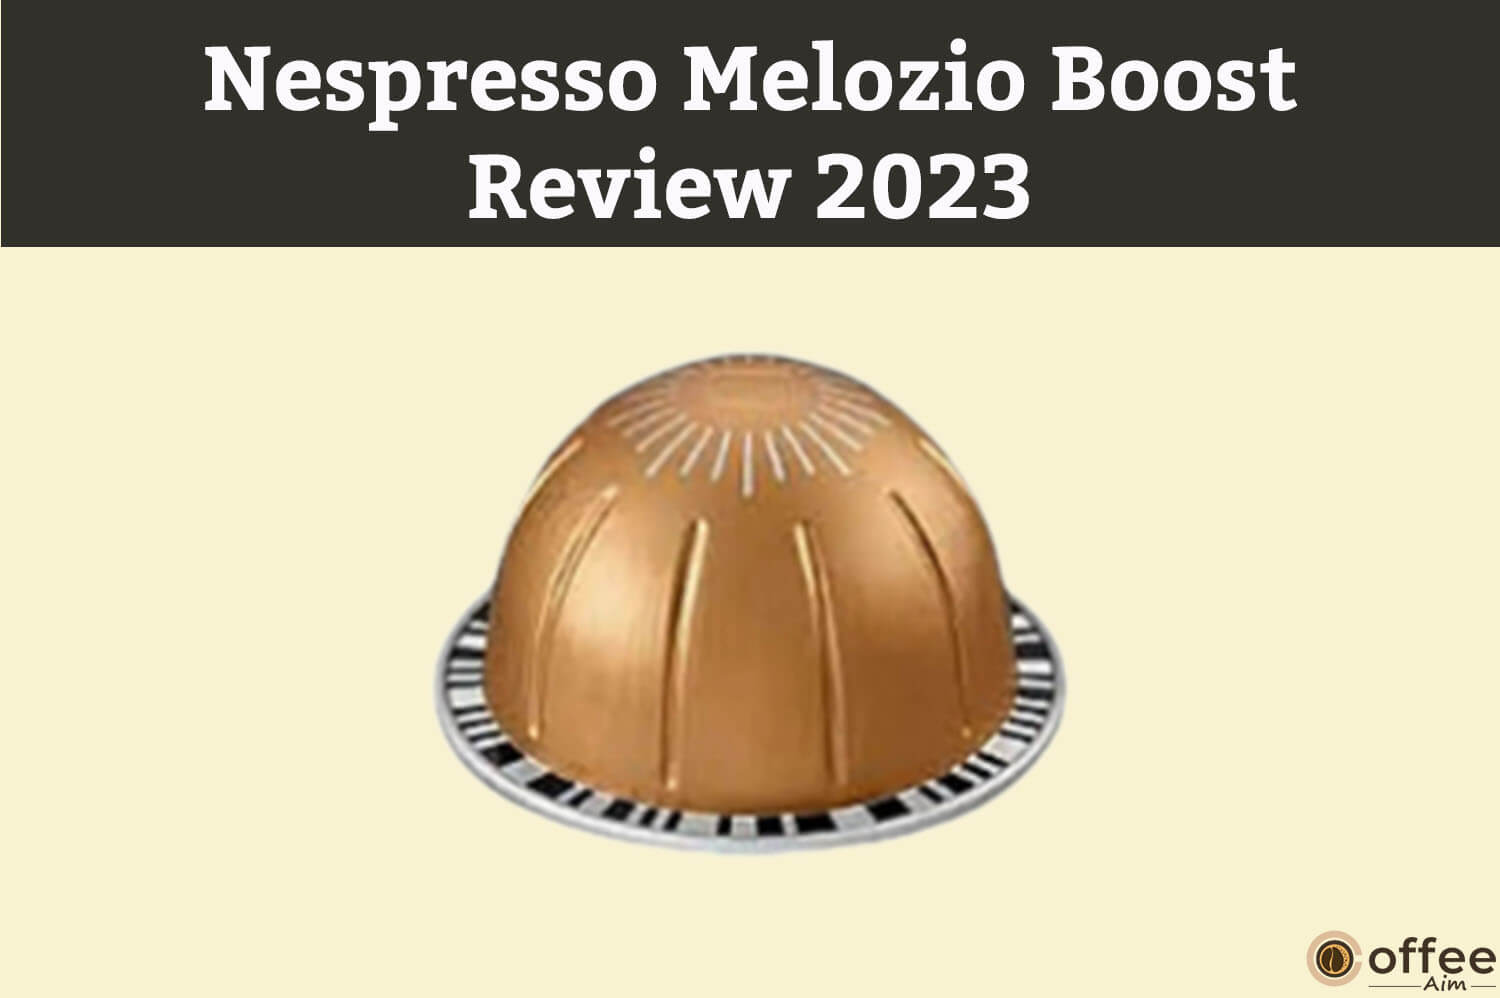 https://coffeeaim.com/wp-content/uploads/2022/09/Nespresso-Melozio-Boost-Review-2023.jpg?ezimgfmt=ng%3Awebp%2Fngcb1%2Frs%3Adevice%2Frscb1-2